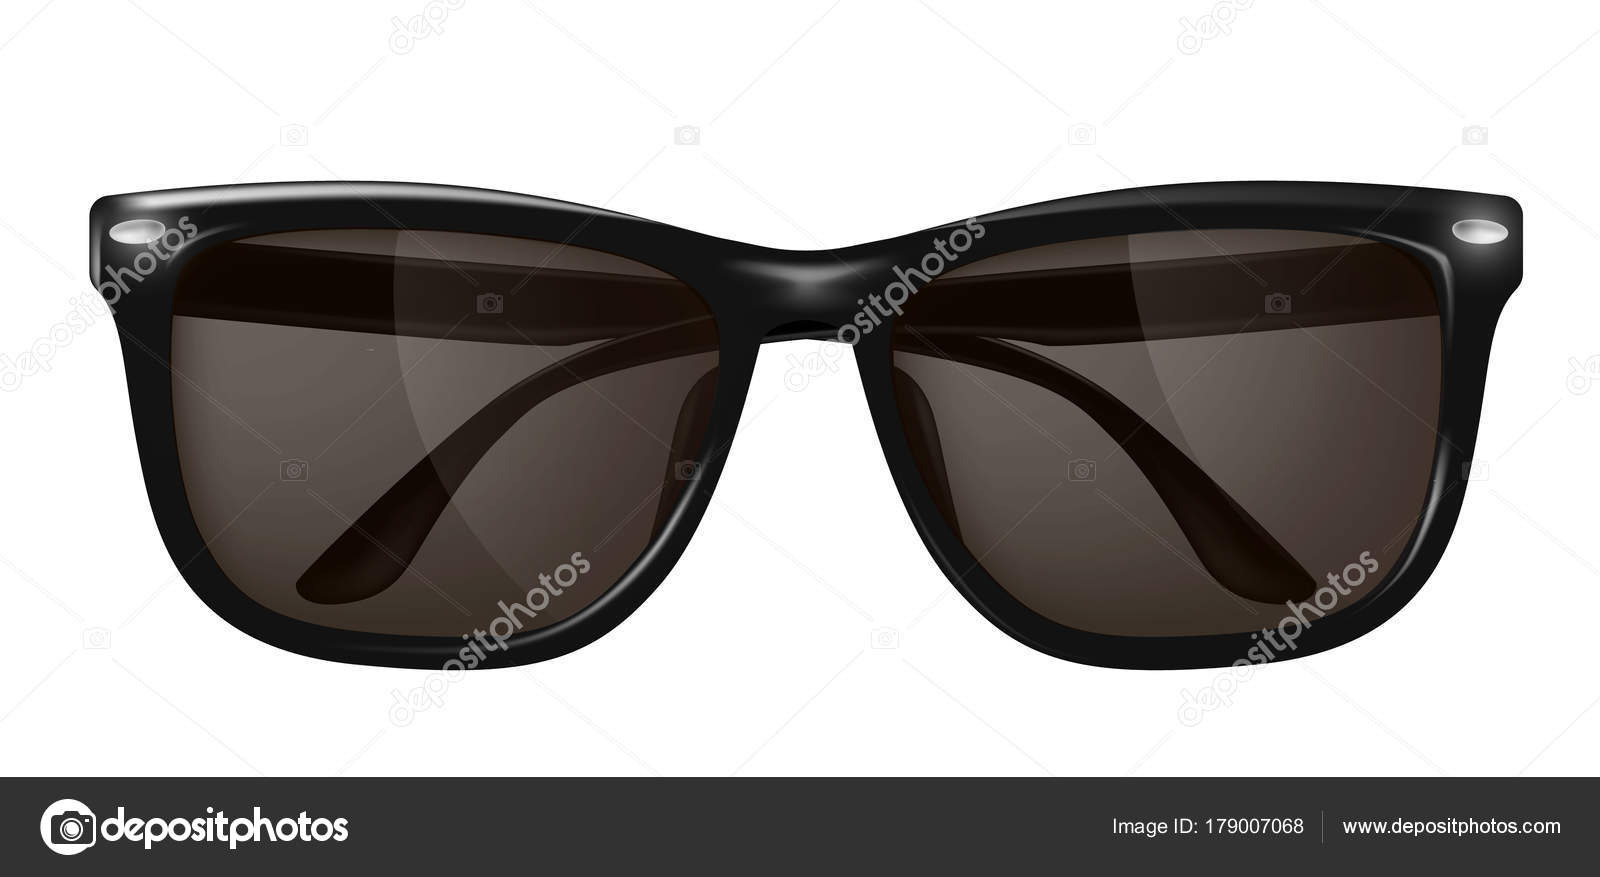 Download Vector Realistic Sunglasses Spectacles Mockup Vector Image By C Irinabelokrylova Vector Stock 179007068